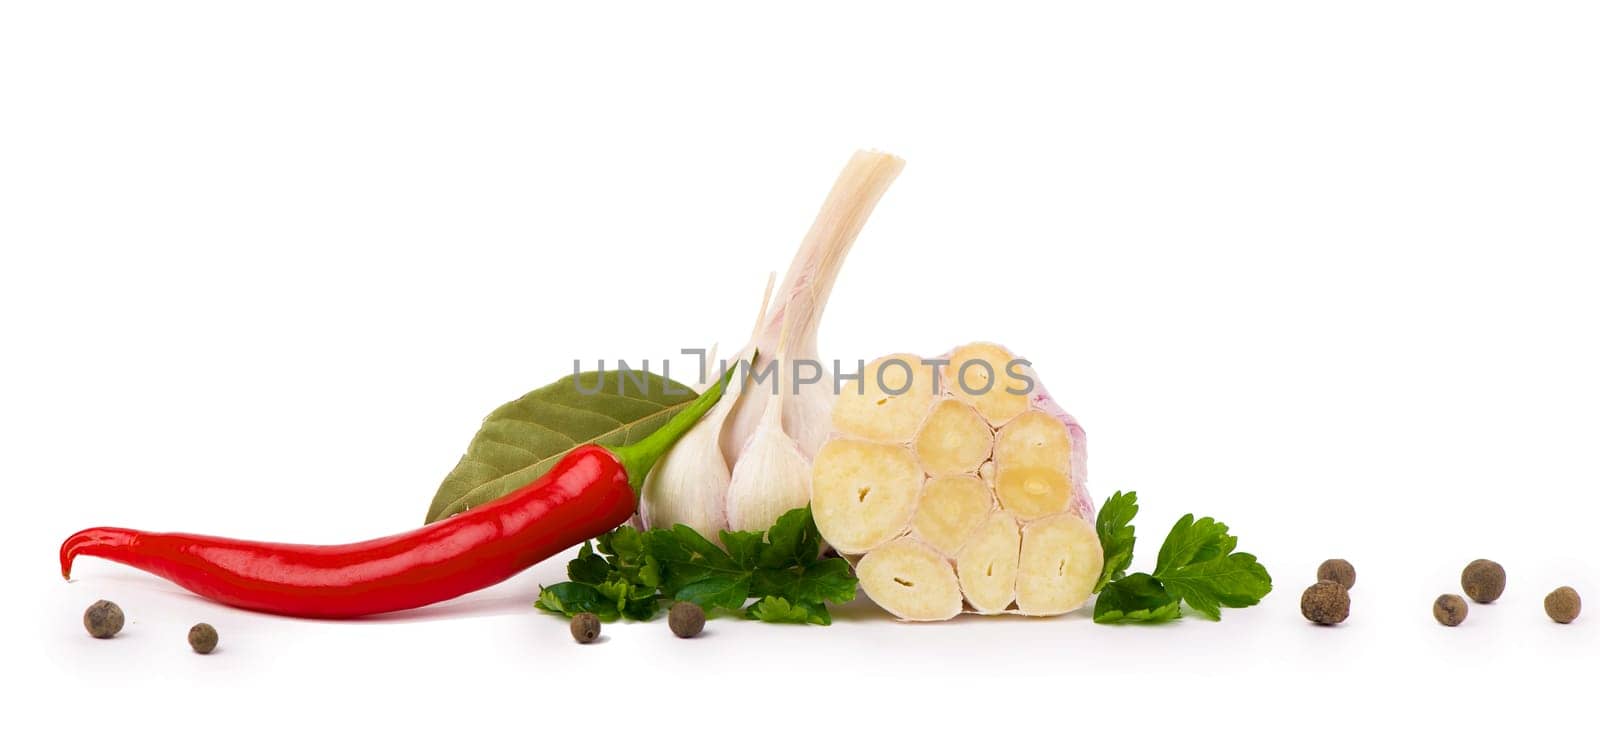 cut garlic on white background Head of young garlic with garlic cloves and parsley leaf isolated on white background.